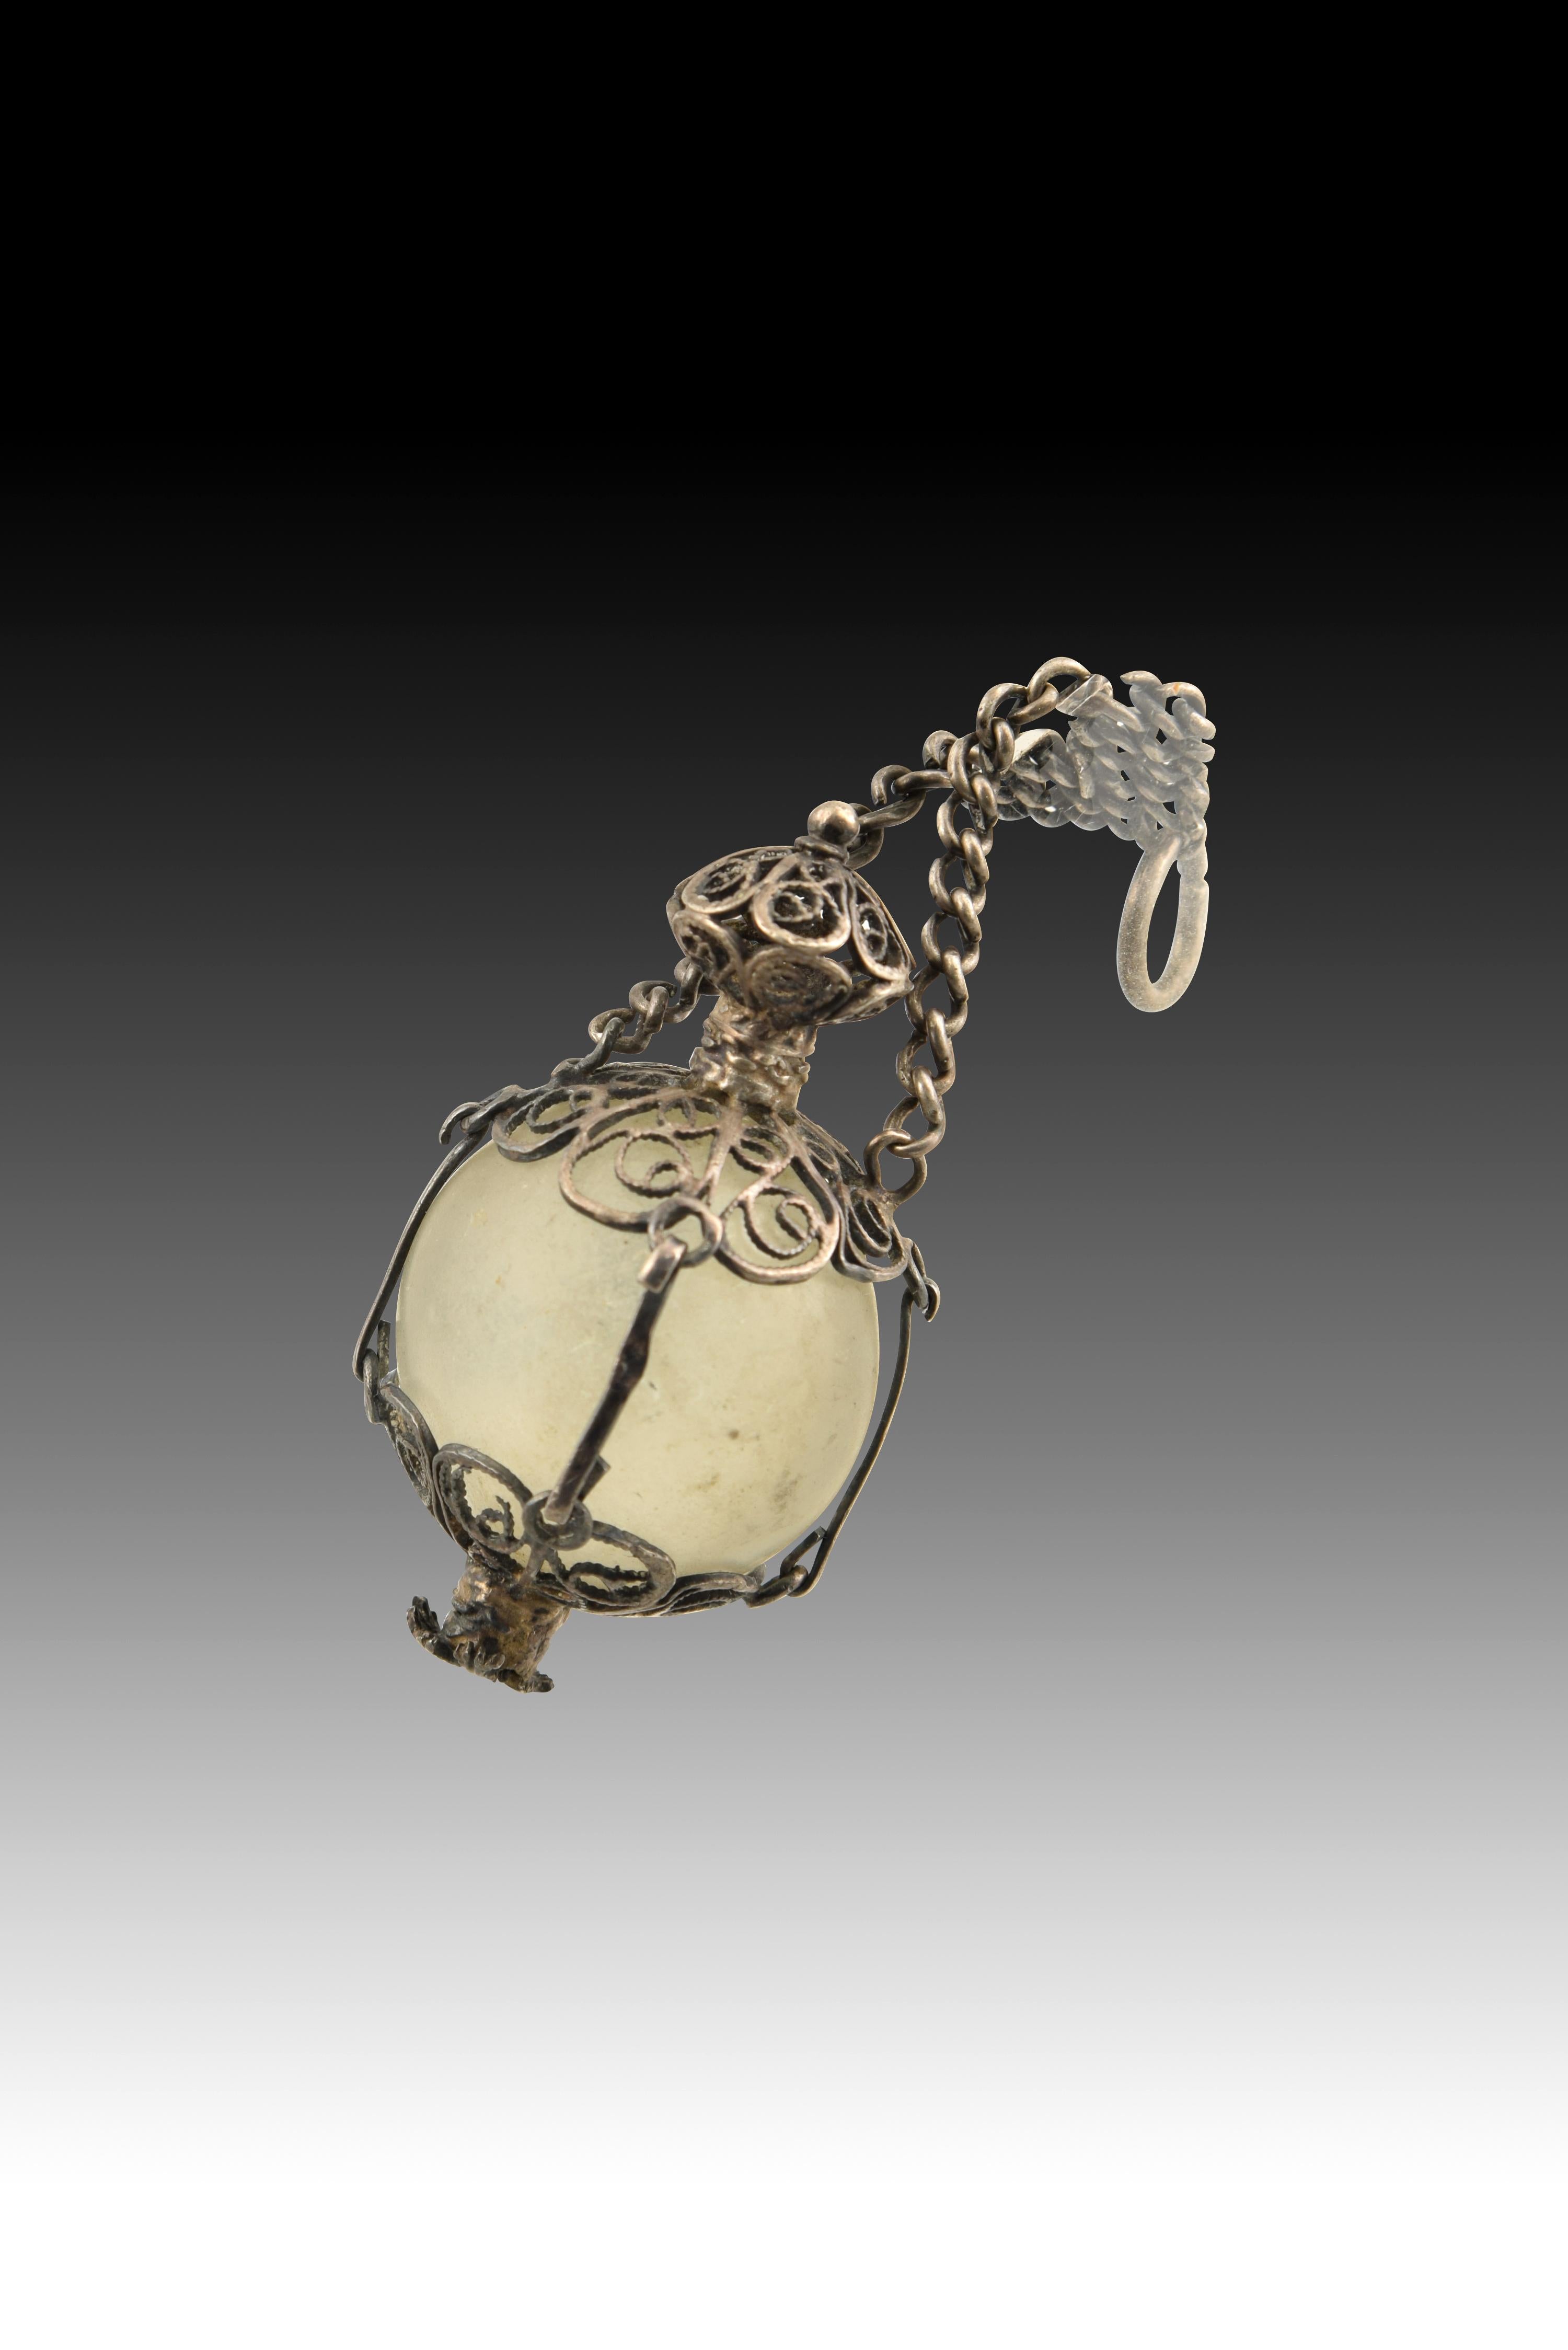 Pendant. glass, silver Century XVIII.
 A translucent white glass bead has been placed inside a frame of silver in its color made up of two areas worked in fretwork or filigree, a technique also present in the spherical shape that finishes off this